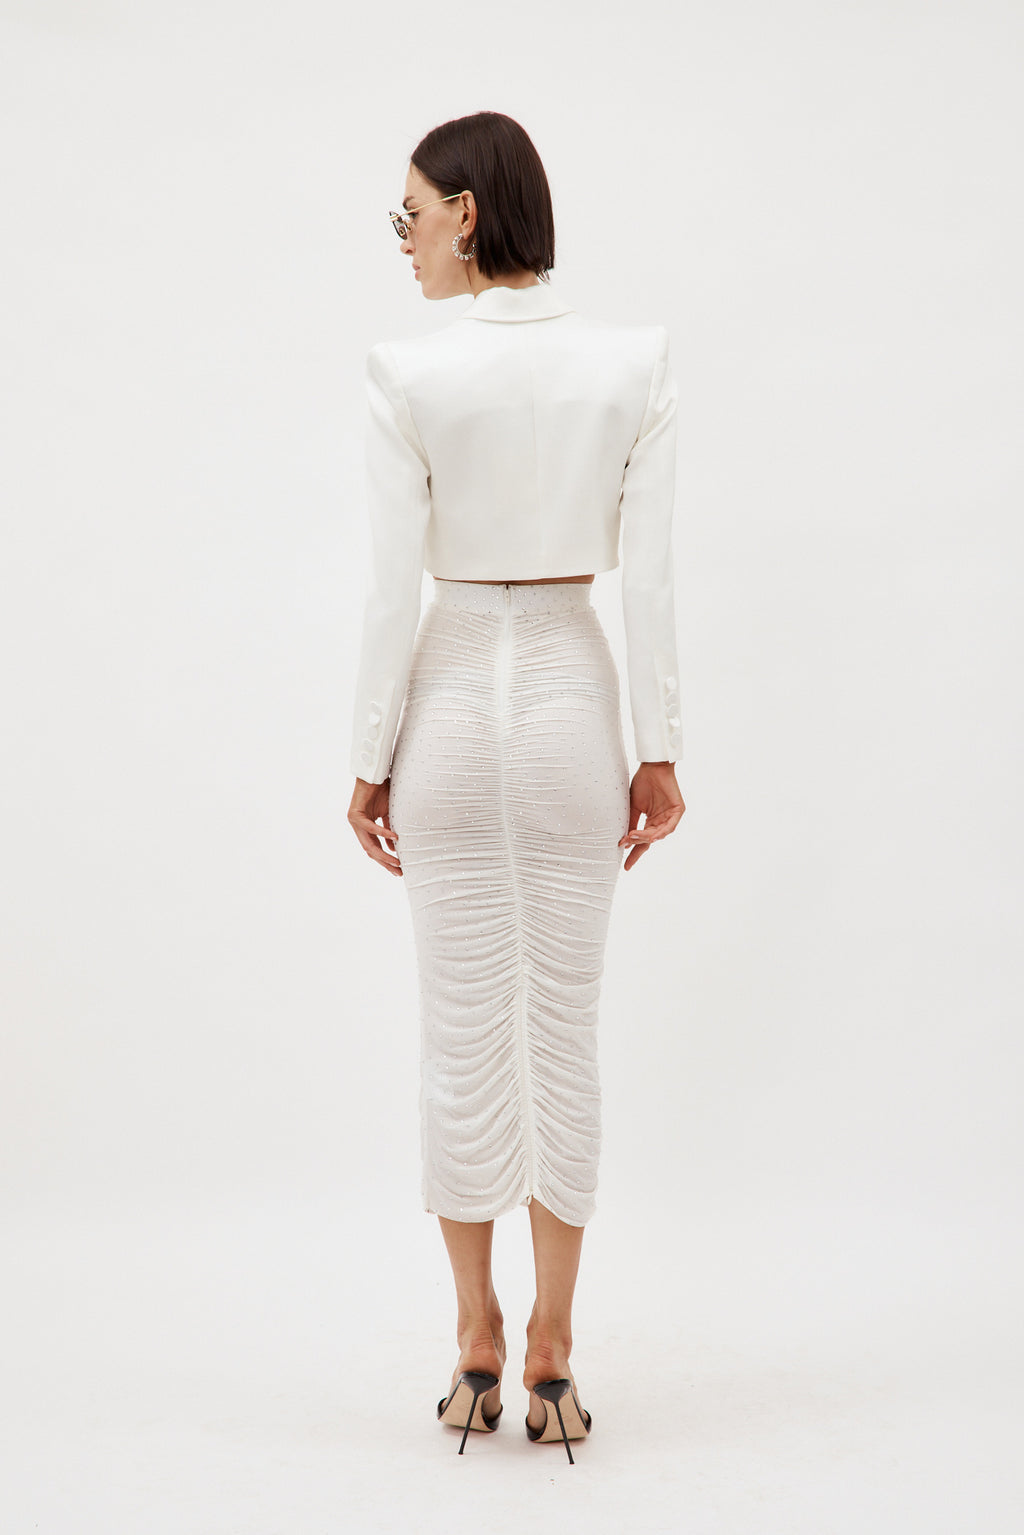 Crystal Jersey Ruched White Skirt